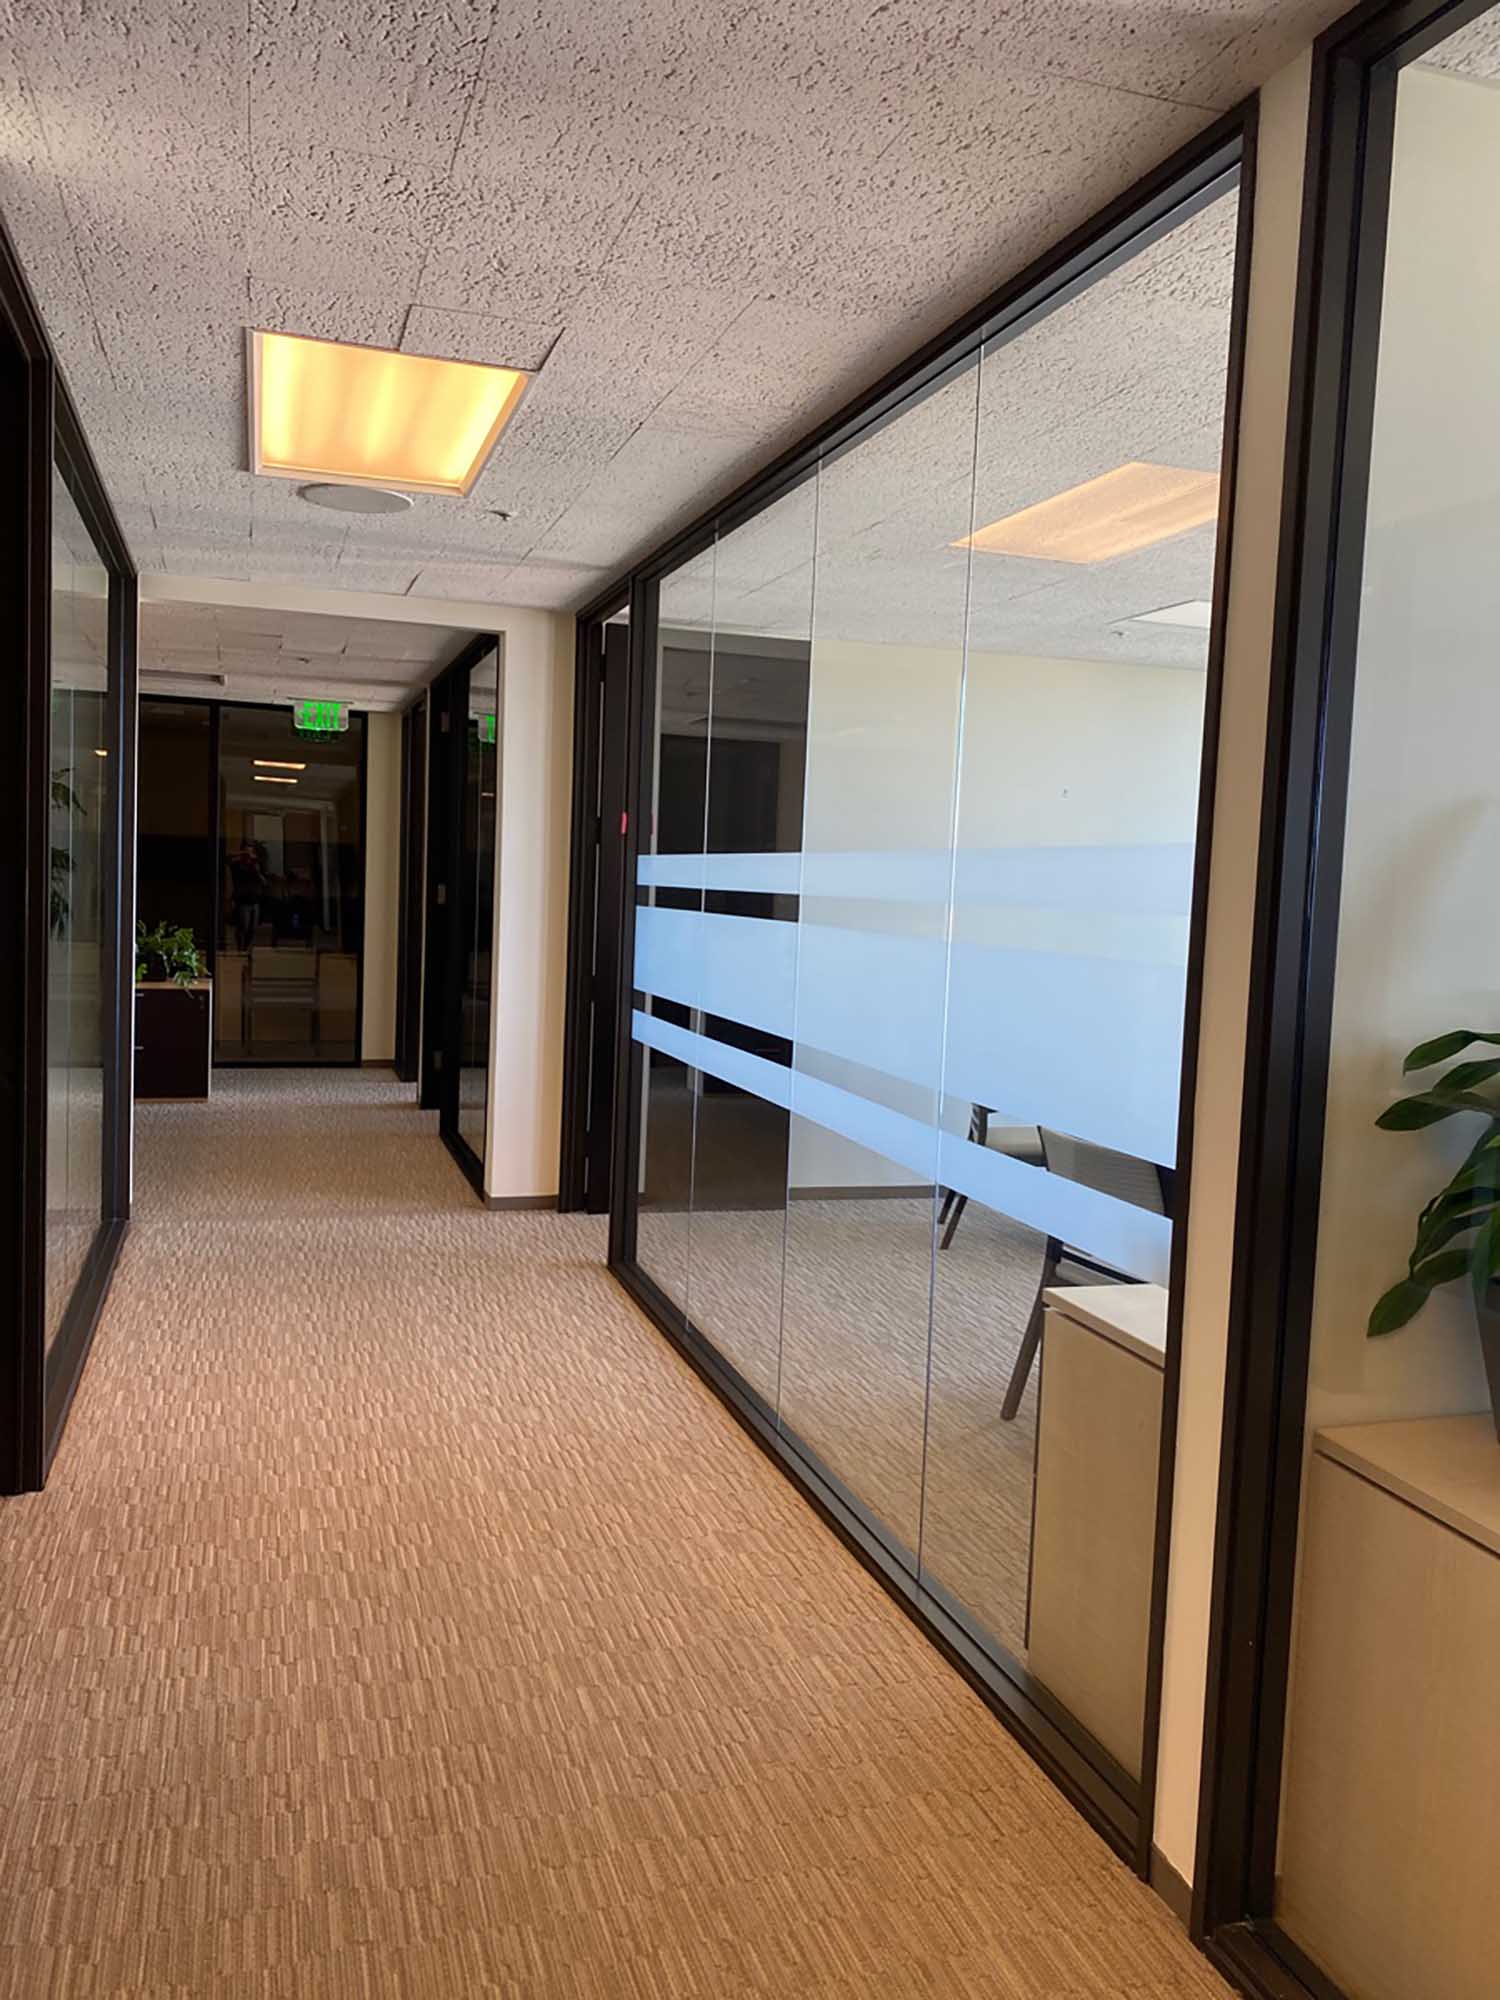 How To Get Decorative Window Film for Your San Francisco Office. Get a free estimate from ClimatePro in the Bay Area.